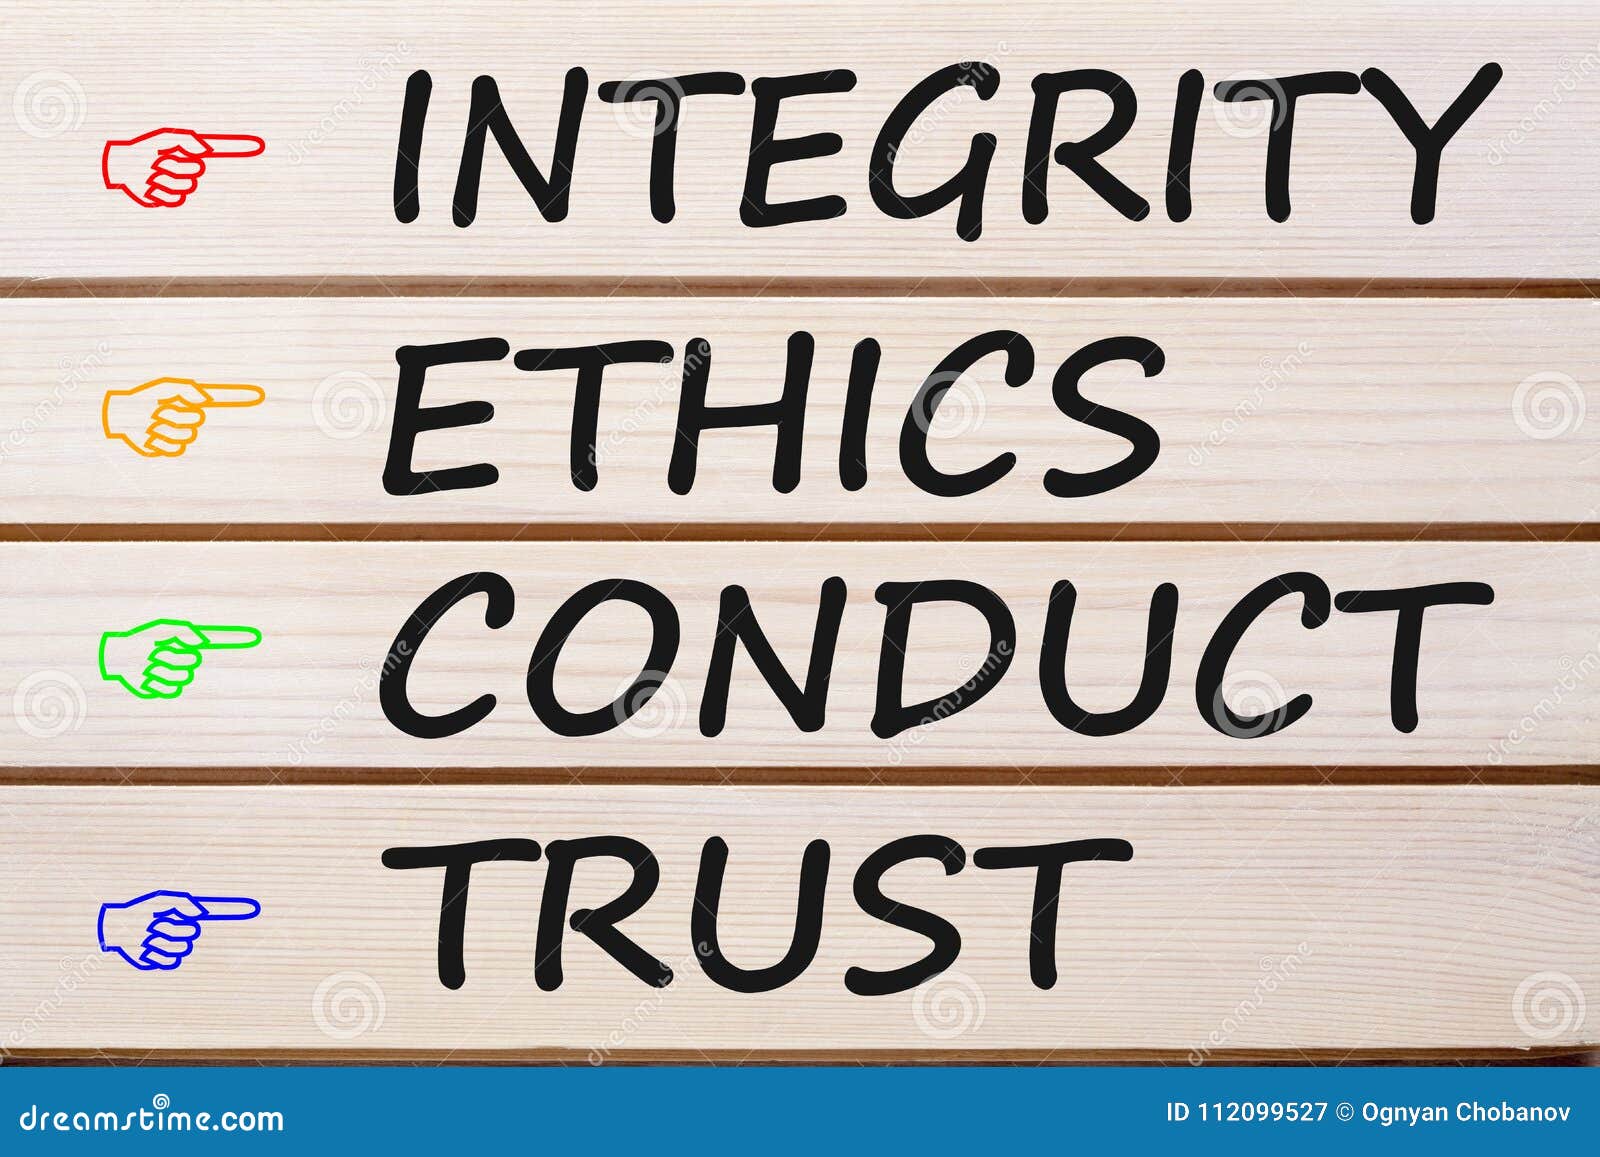 integrity ethics conduct and trust concept